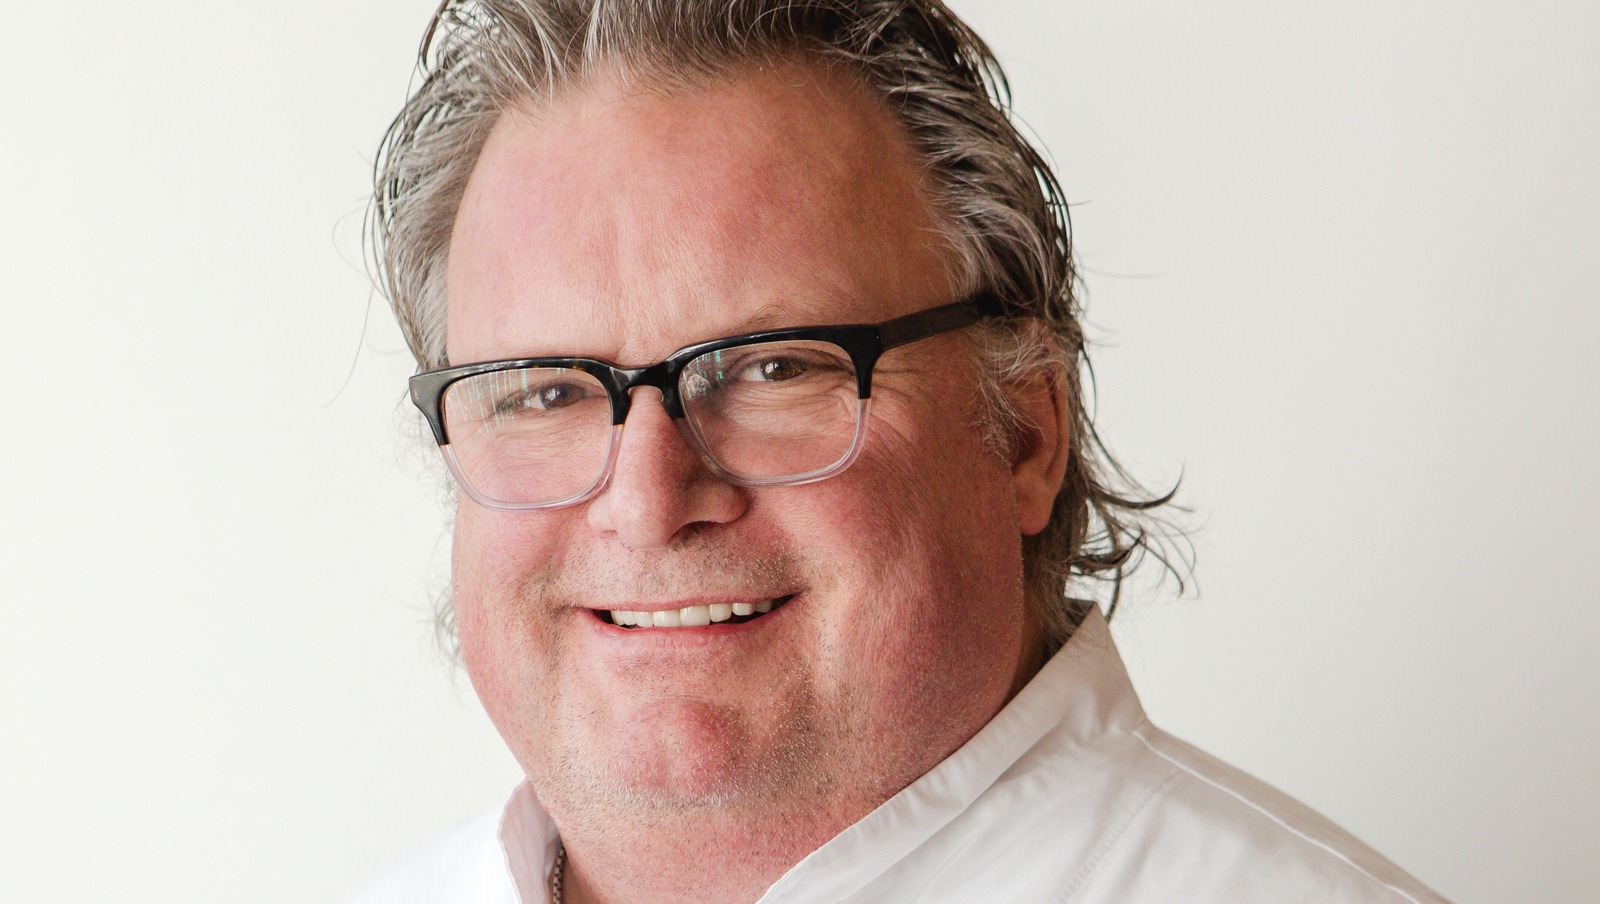 https://www.mashed.com/img/gallery/chef-david-burke-reveals-answers-to-all-of-our-best-foodie-questions-exclusive/l-intro-1626101038.jpg